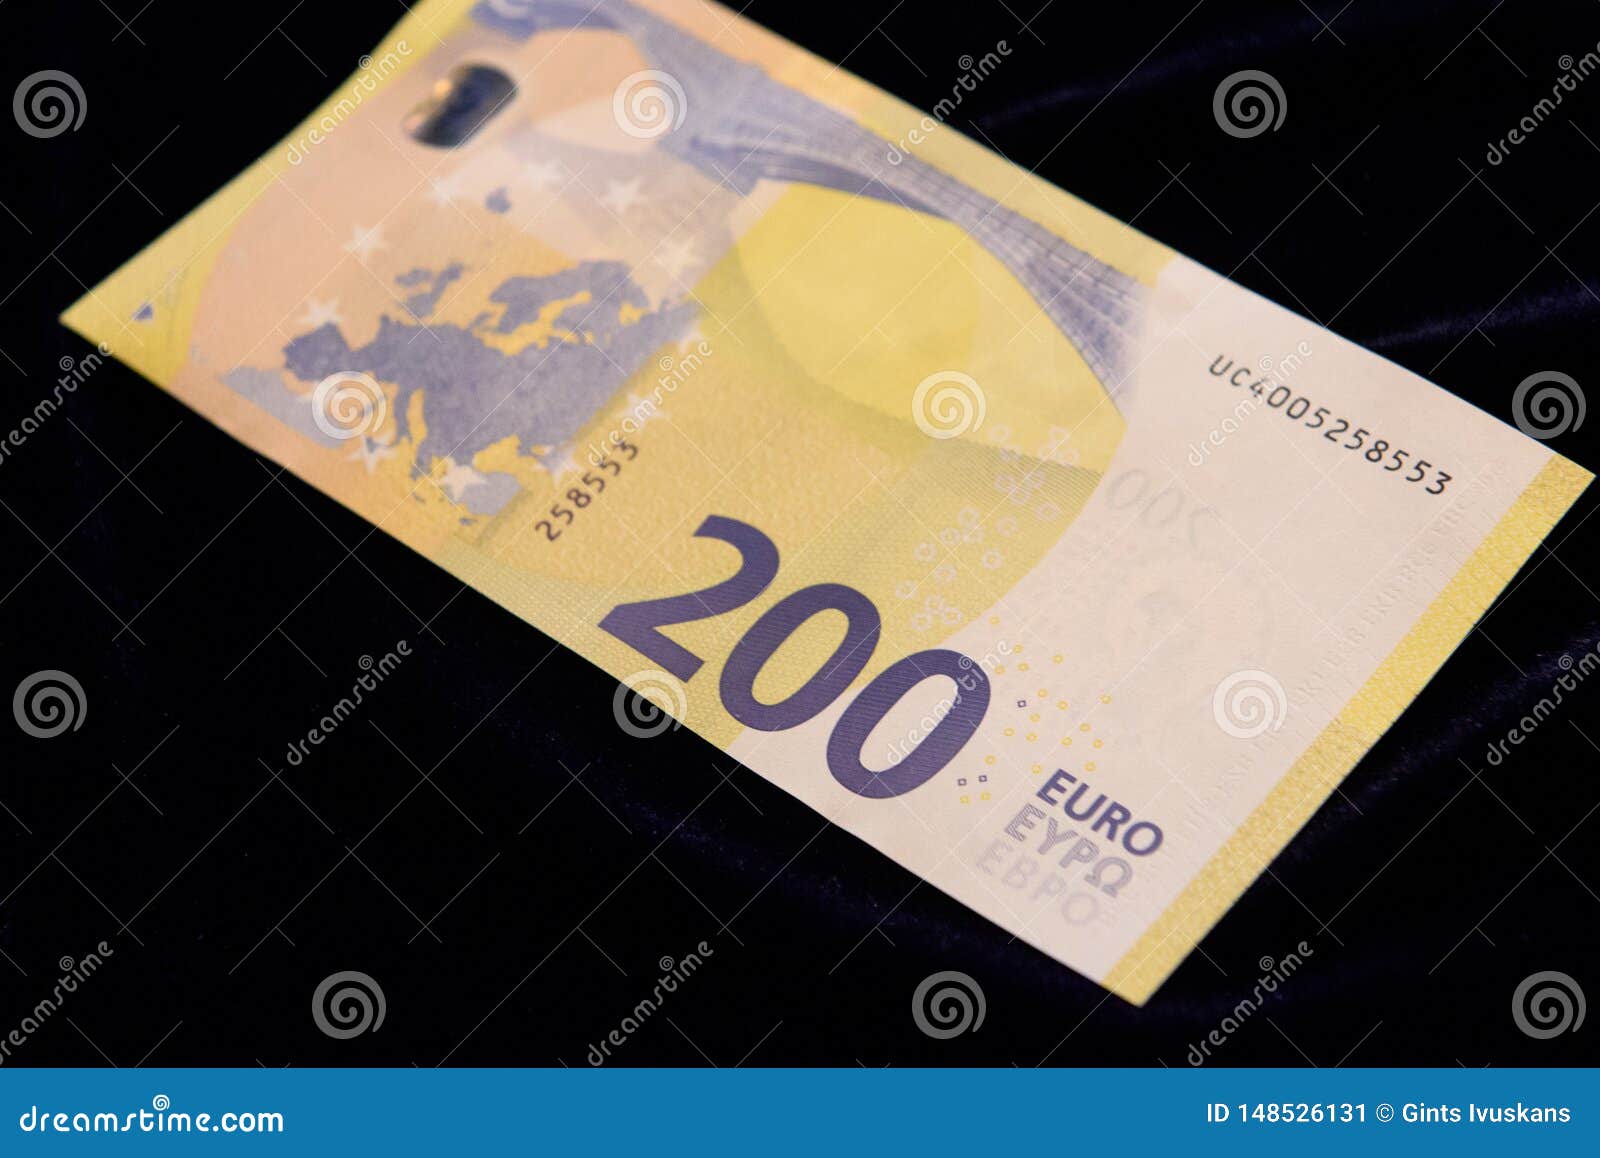 New 200 Euro Banknote of Europa Editorial Photo - Image europa, currency: 148526131